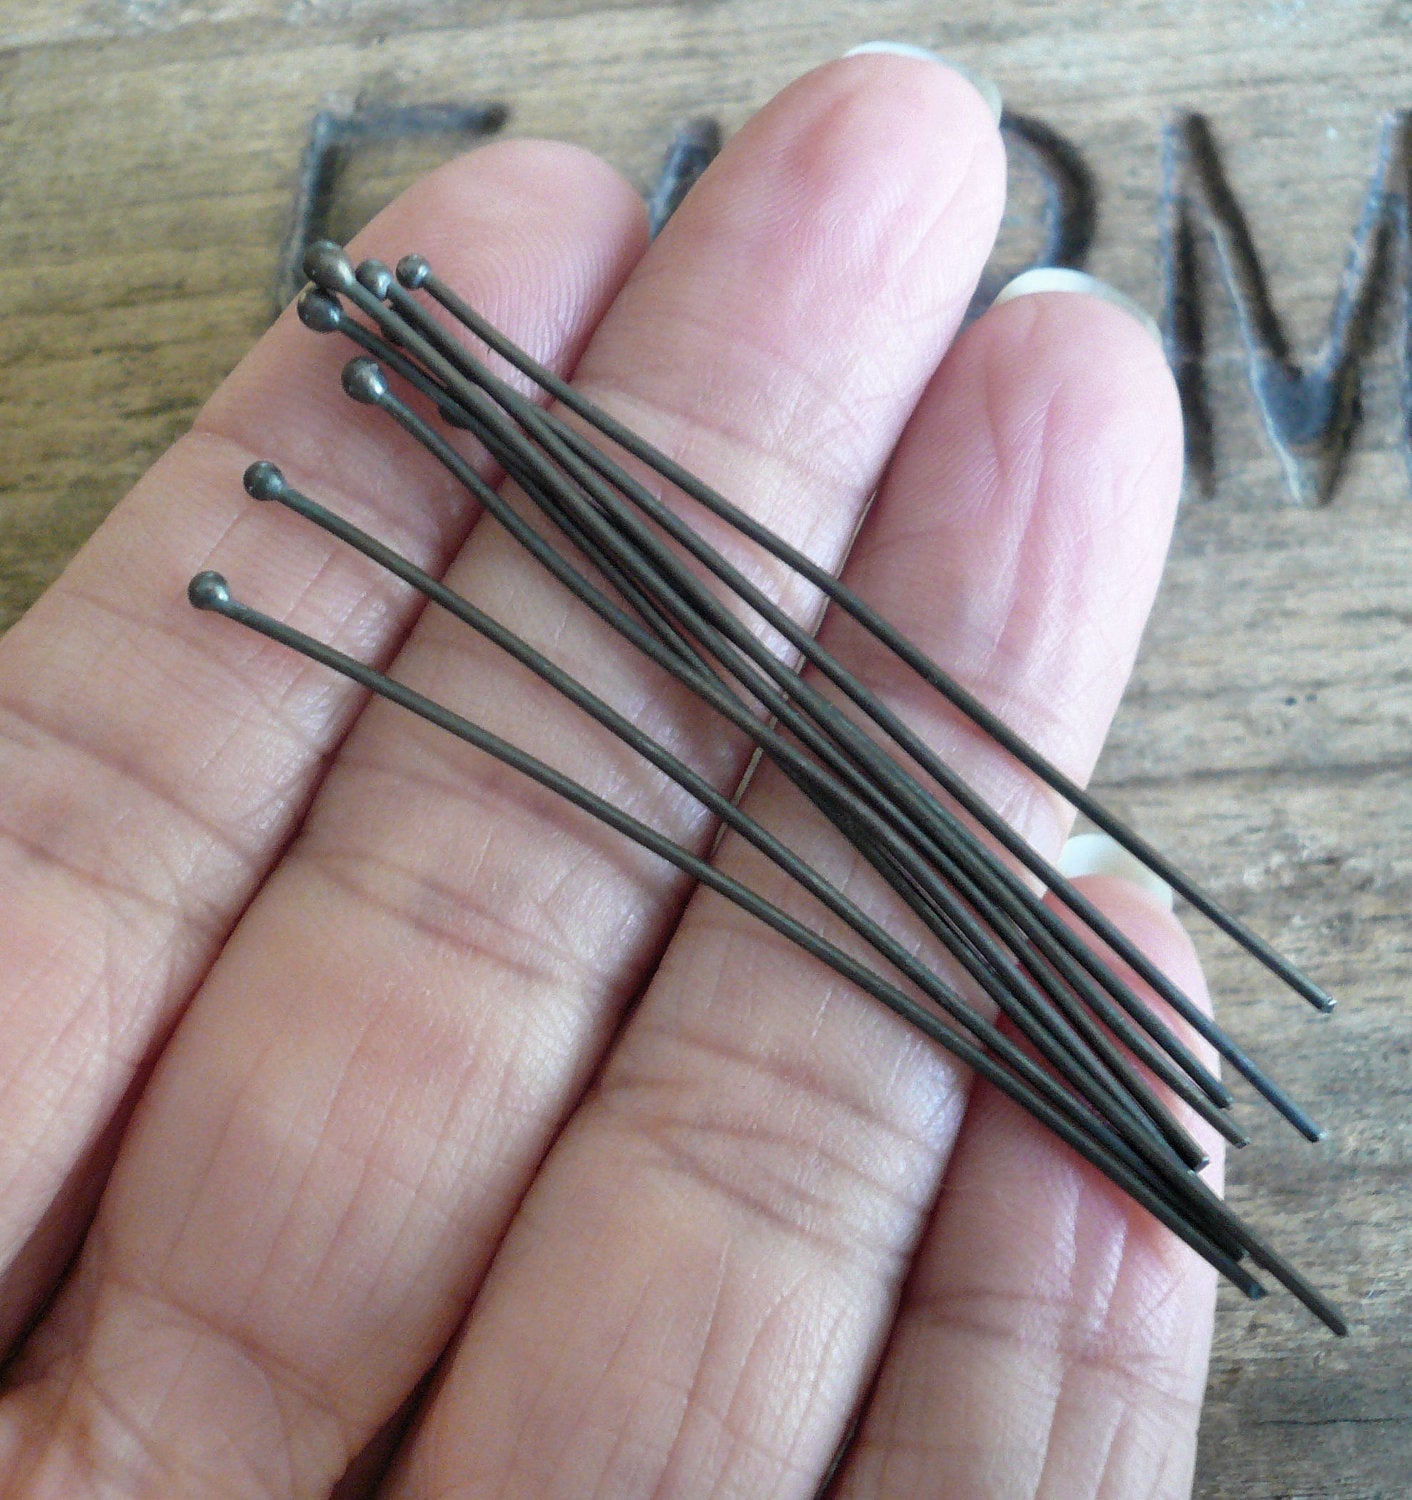 10 3" Fine Silver 24 GAUGE Handmade Ball Headpins - 3 inches. Oxidized and polished